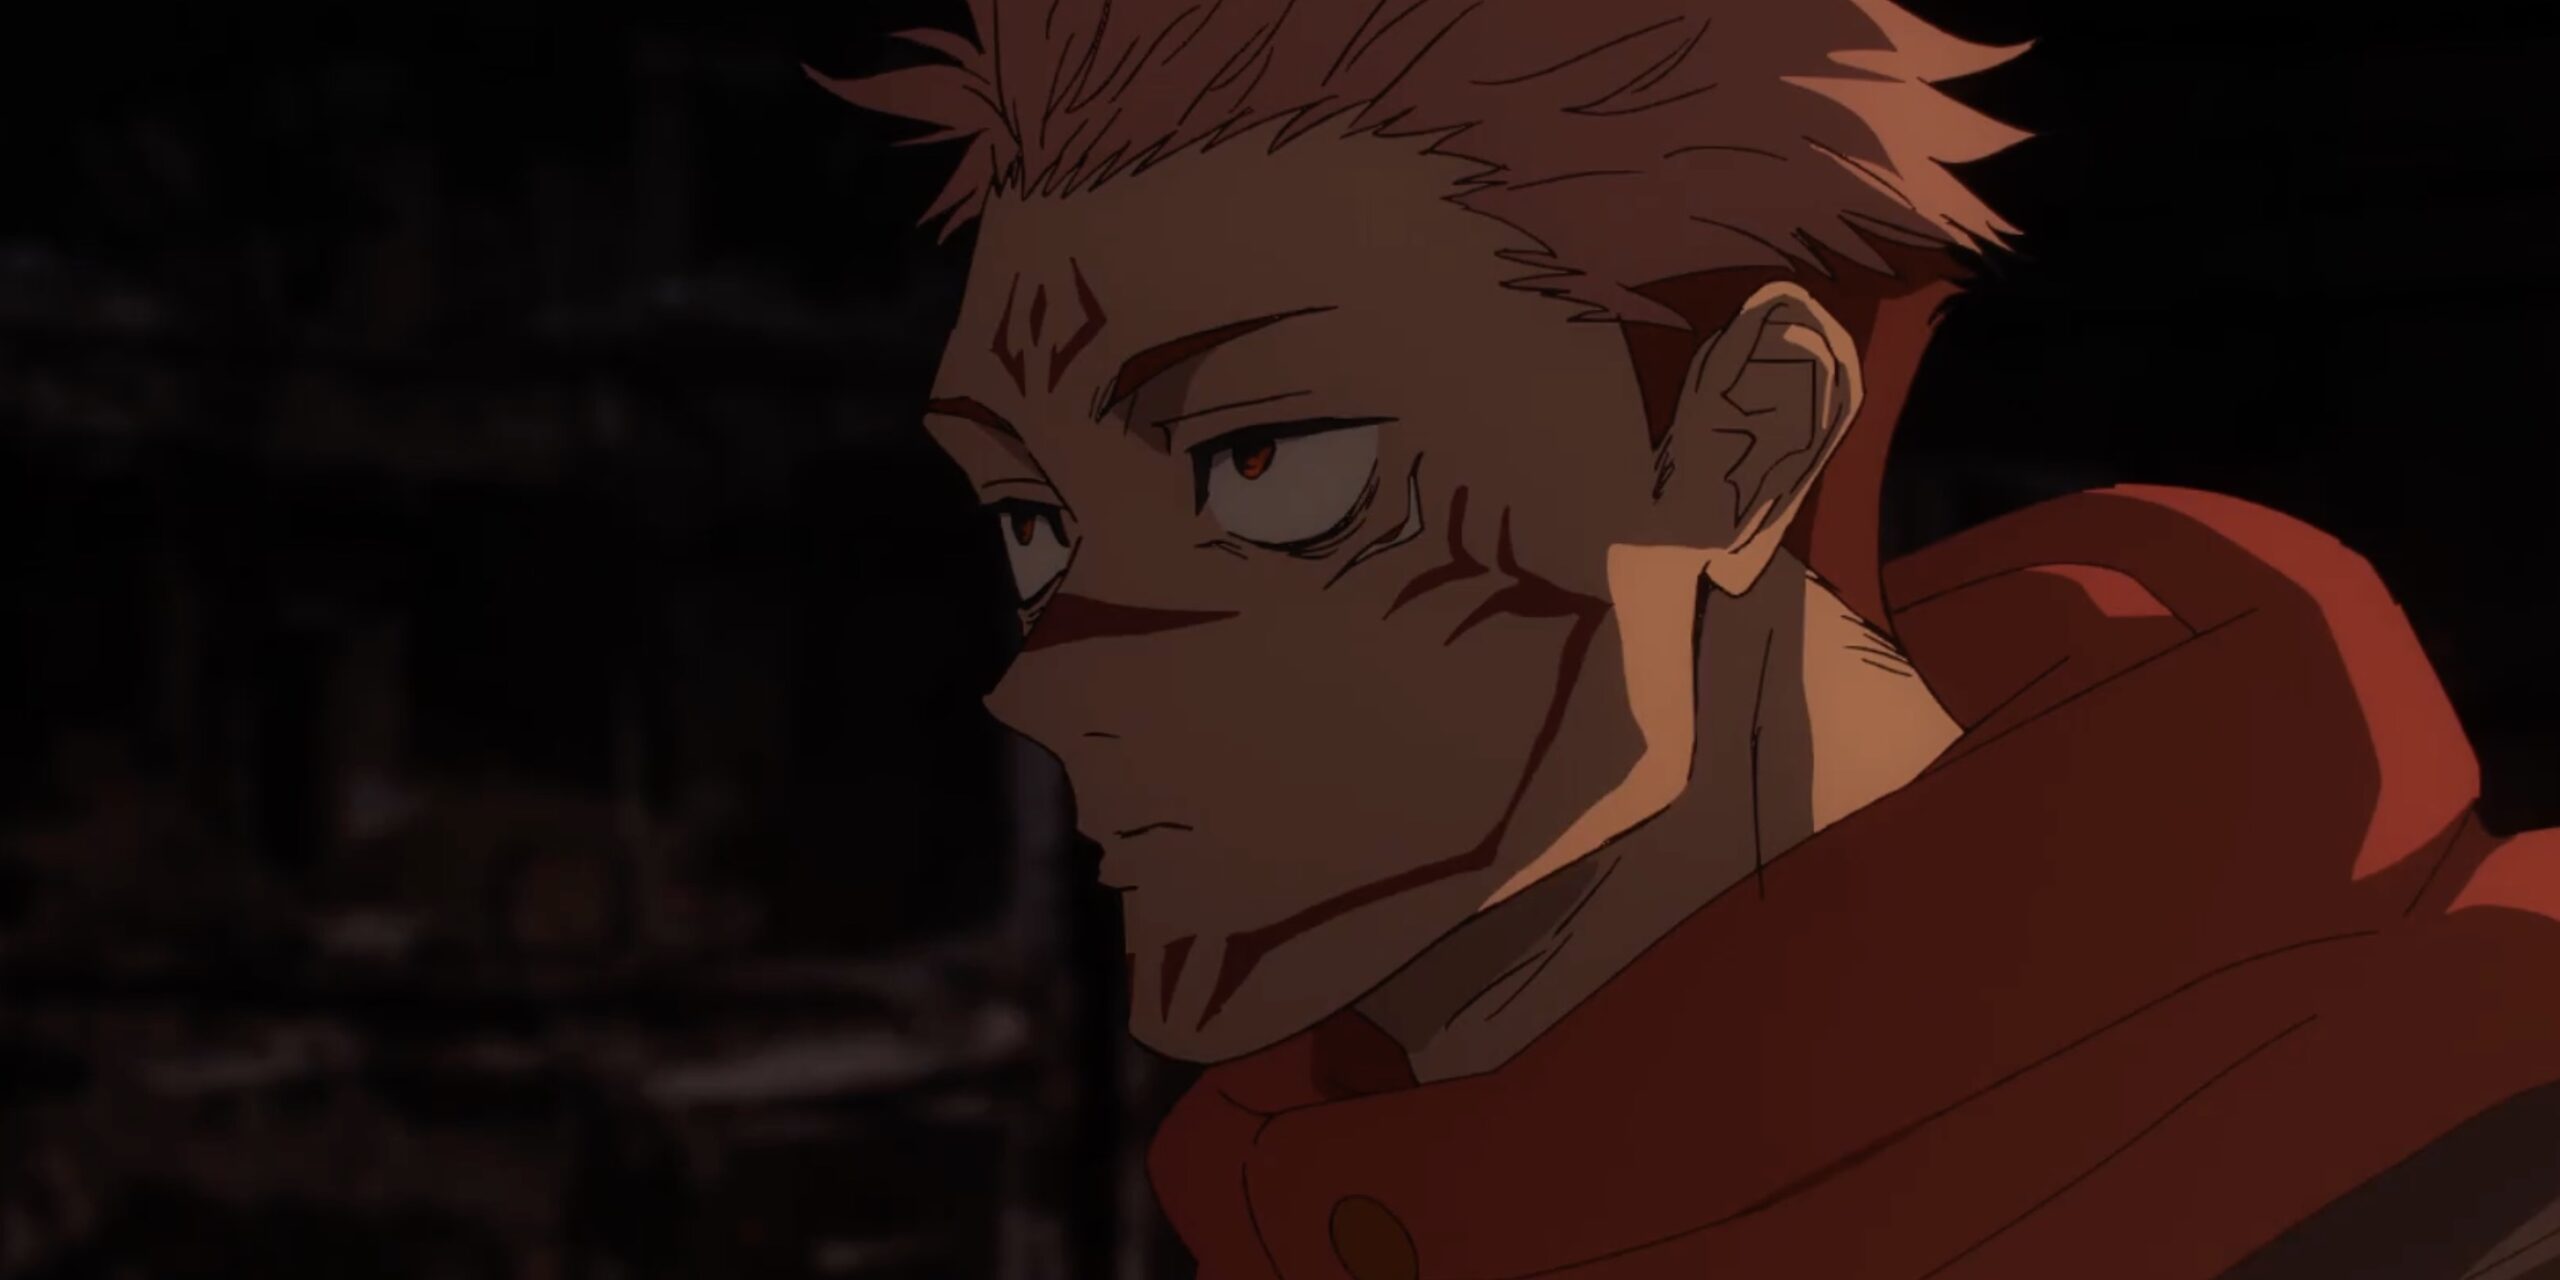 Jujutsu Kaisen Manga Is Ending Probably Because Of Threats To Author's Life